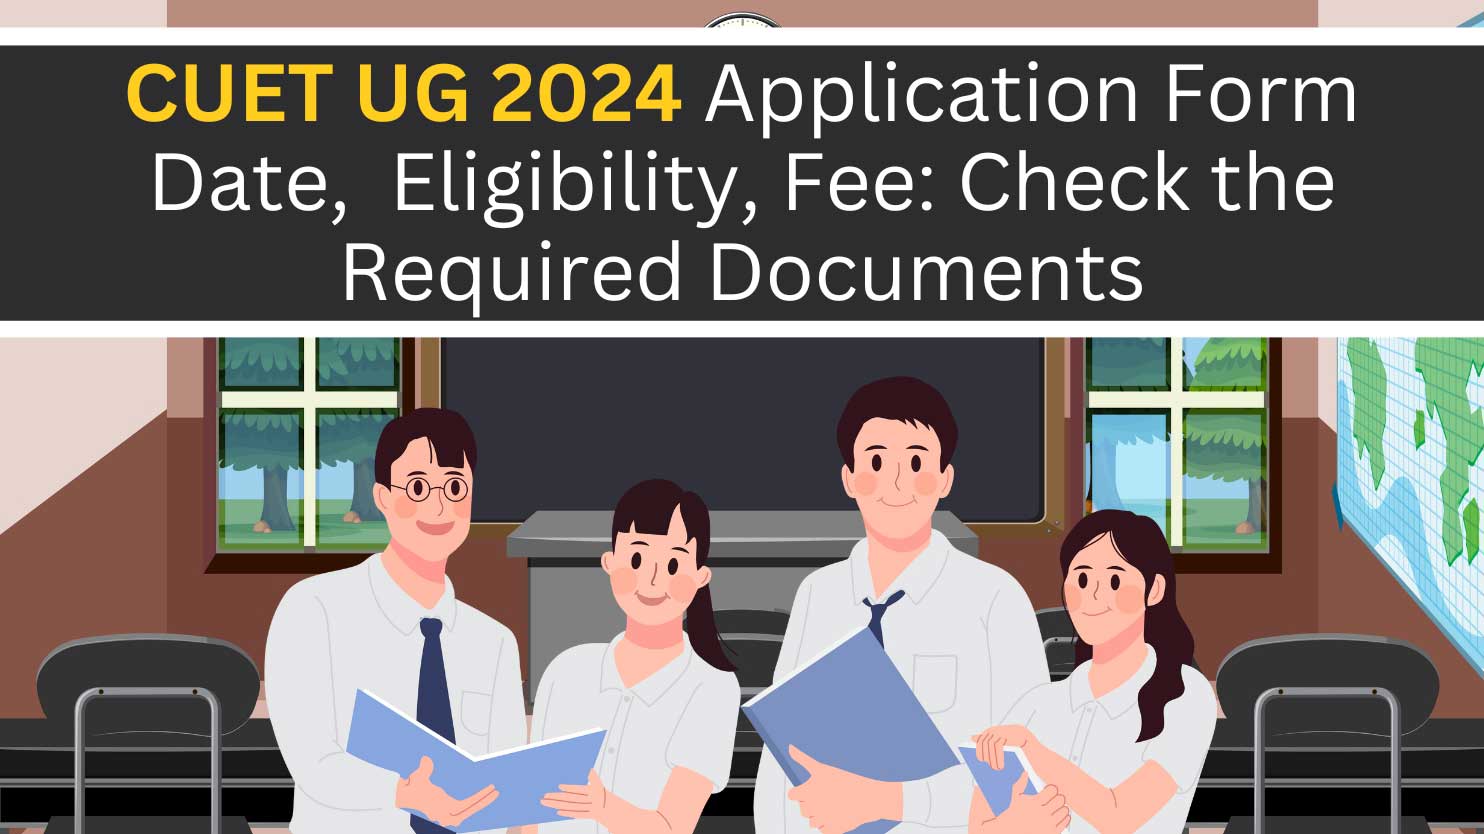 CUET UG 2024 Application Form Date, Eligibility, Fee: Check the Required Documents